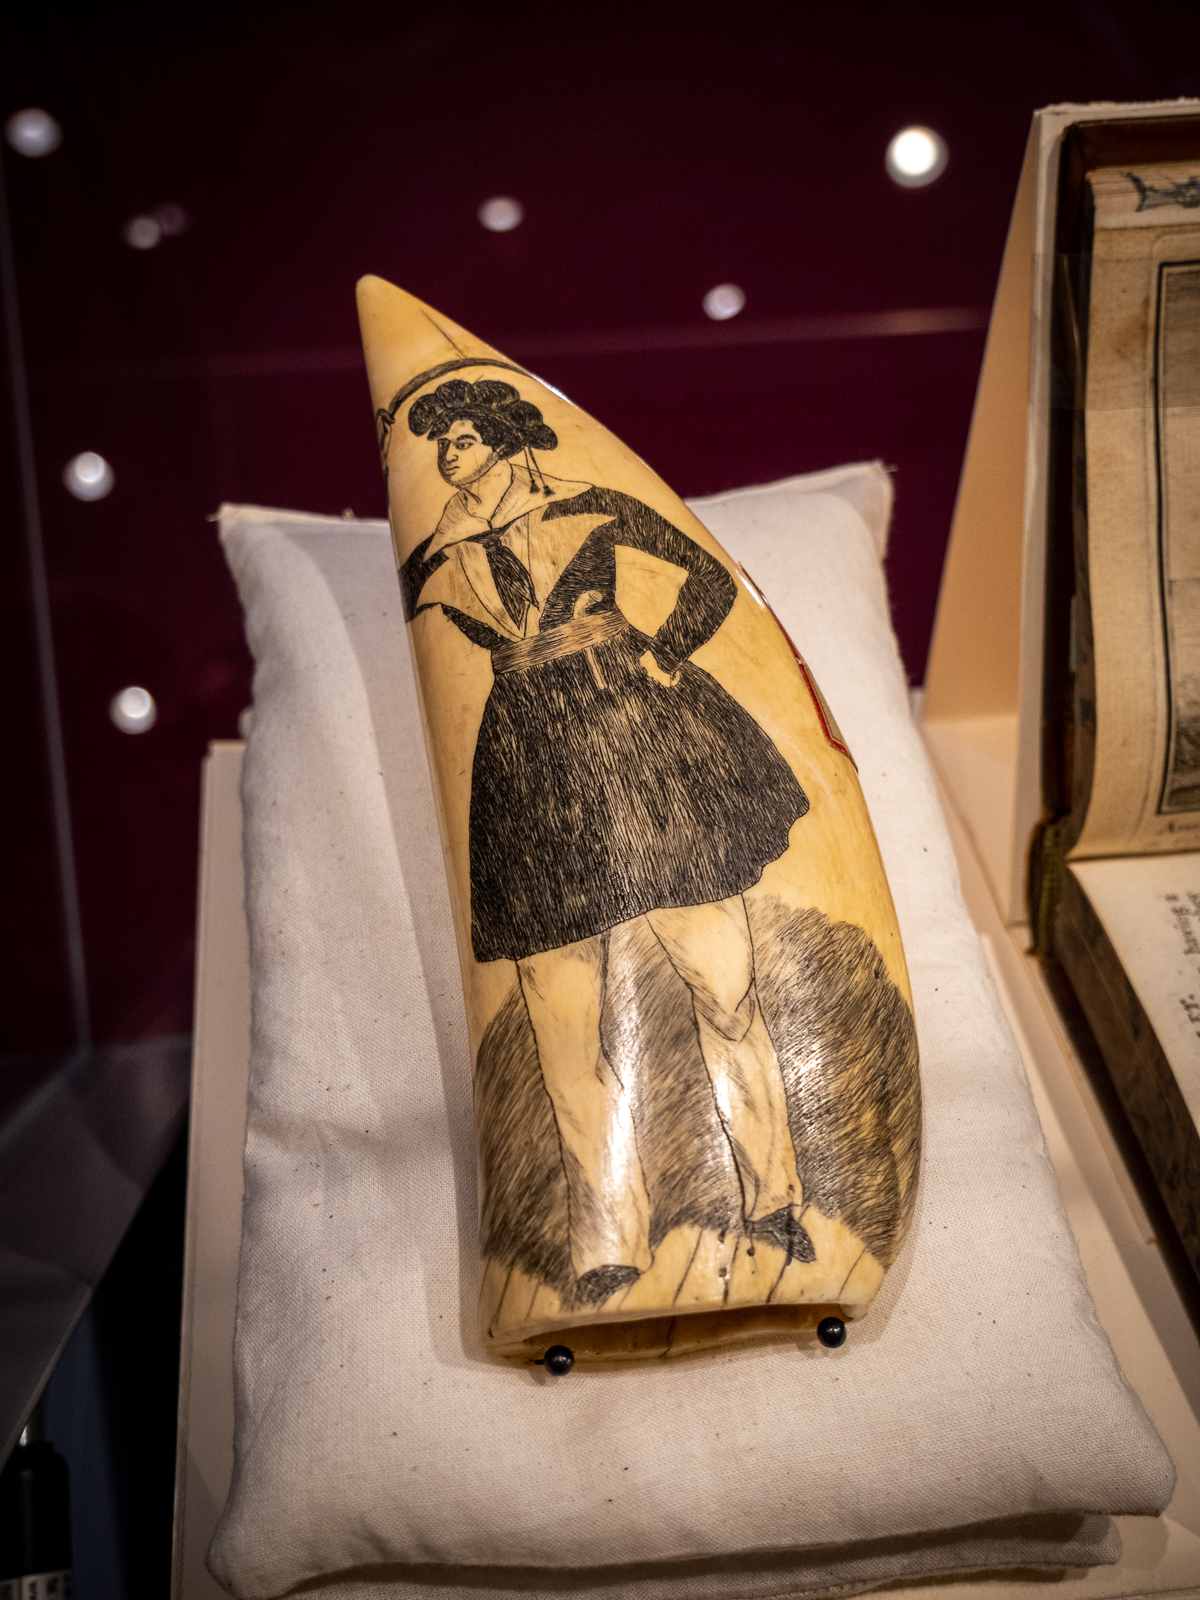 Alwilda the Pirate, scrimshaw on whale tooth. Nicholson Whaling Collection.